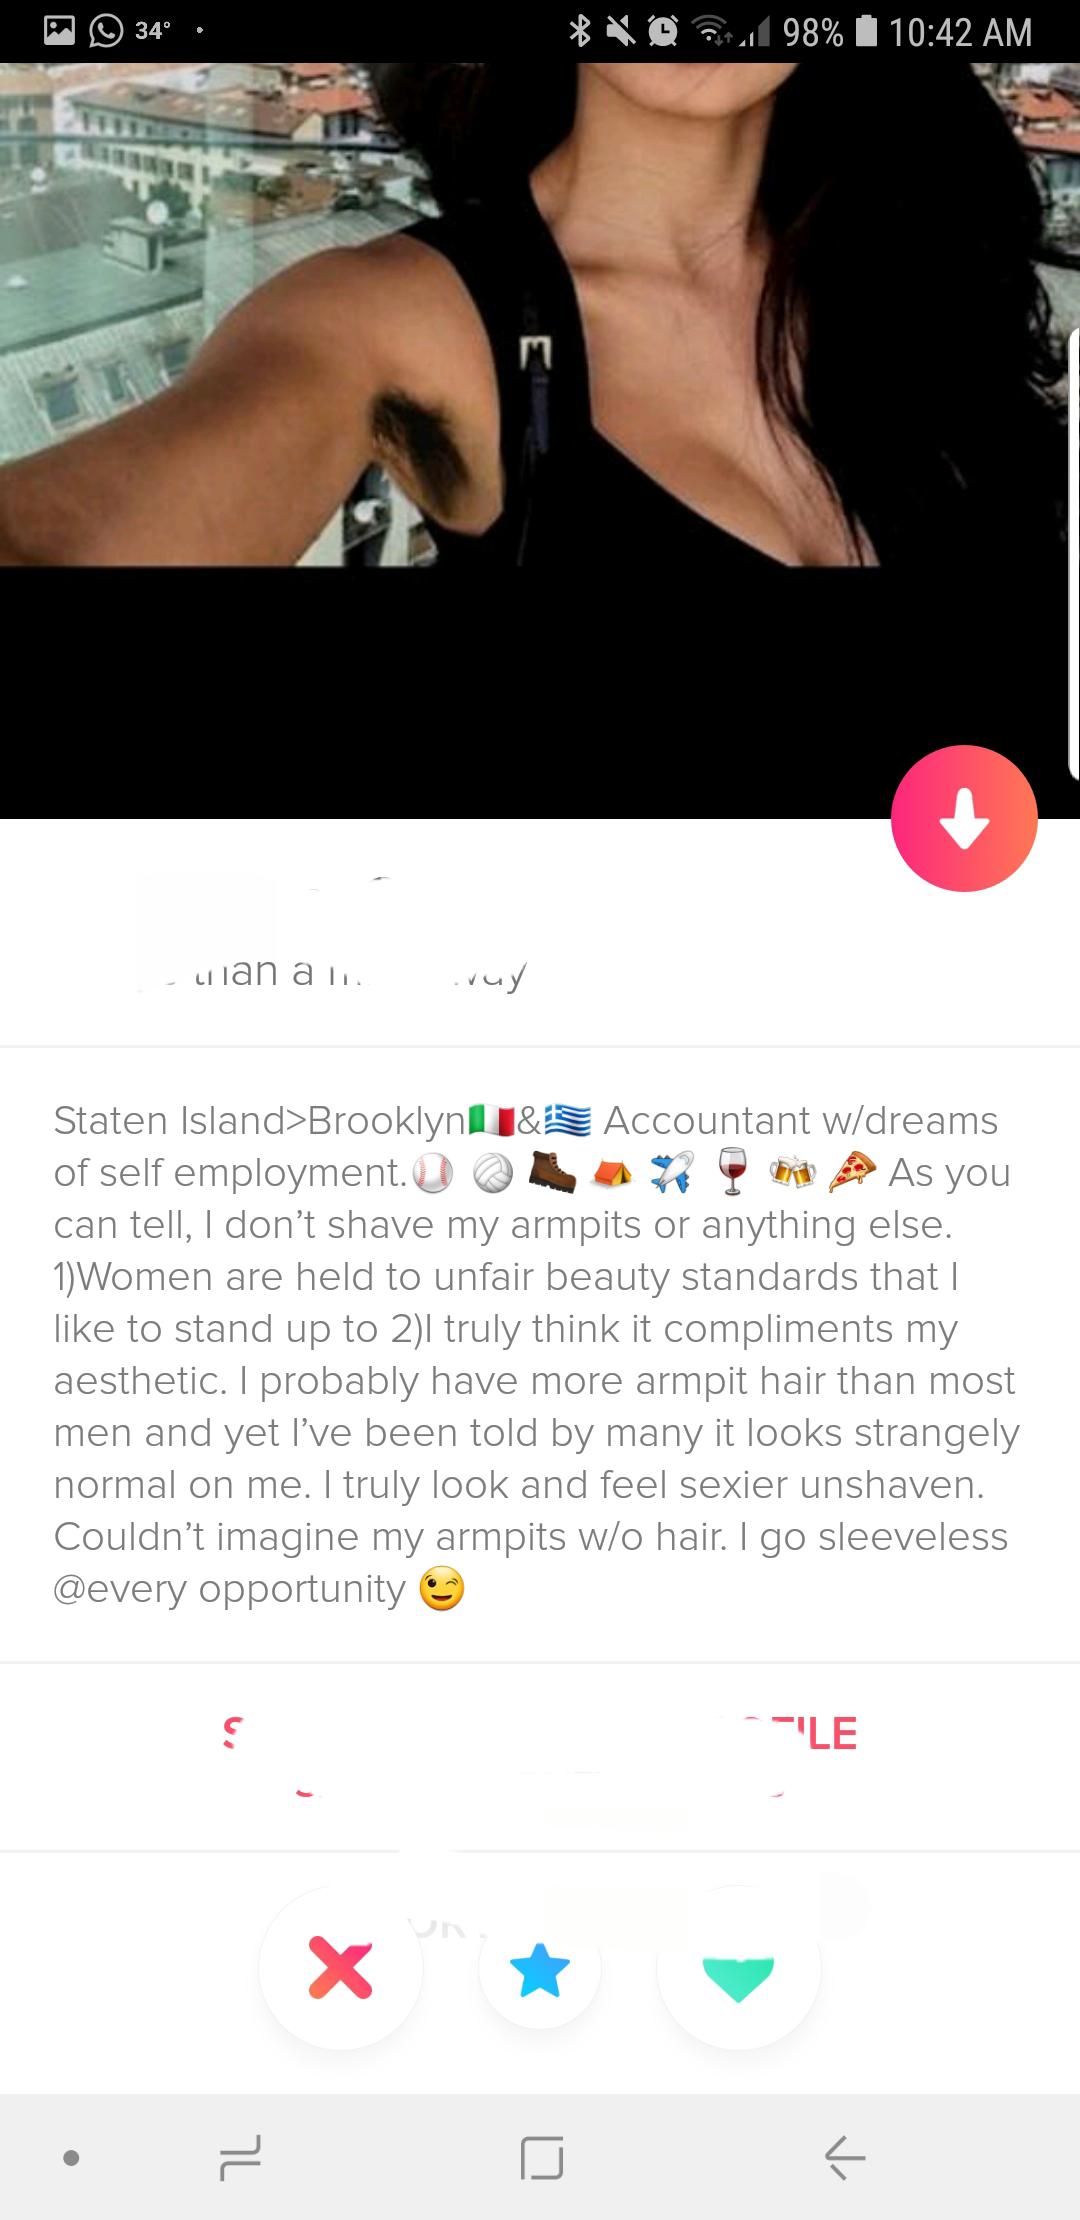 Shameless Tinder profile that says Staten Island>Brooklynl 1& Accountant wdreams of self employment. As you can tell, I don't shave my armpits or anything else. 1 Women are held to unfair beauty standards that | to stand up to 21 truly think it compliment